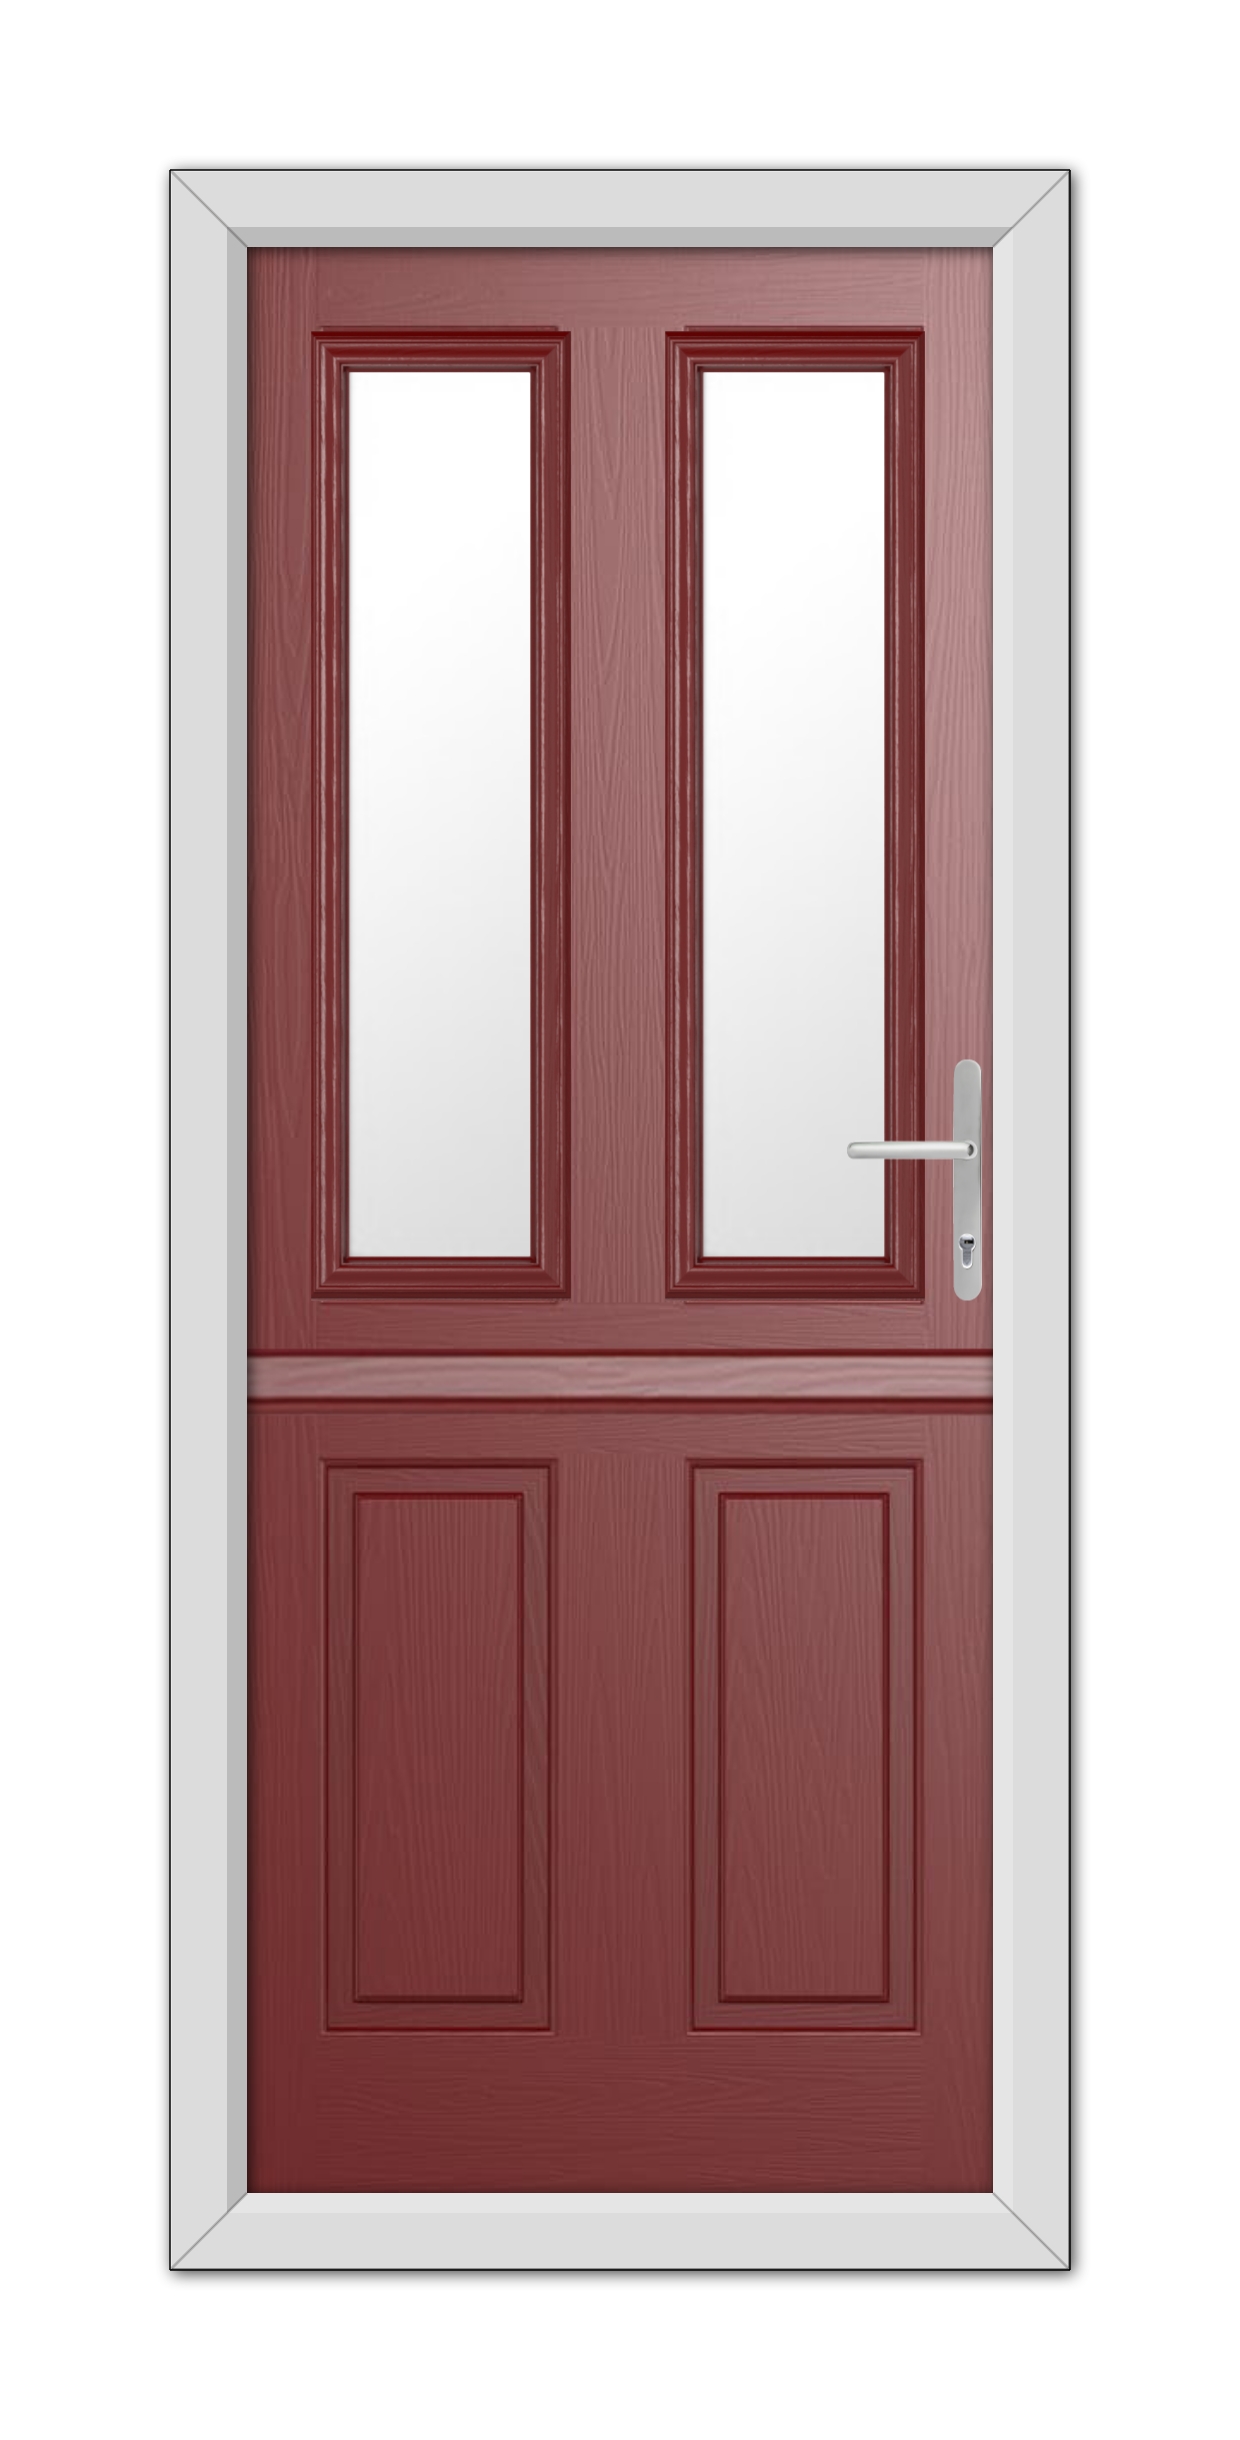 A modern Red Whitmore Stable Composite Door 48mm Timber Core with white rectangular panels and a silver handle, set in a white frame, isolated on a white background.